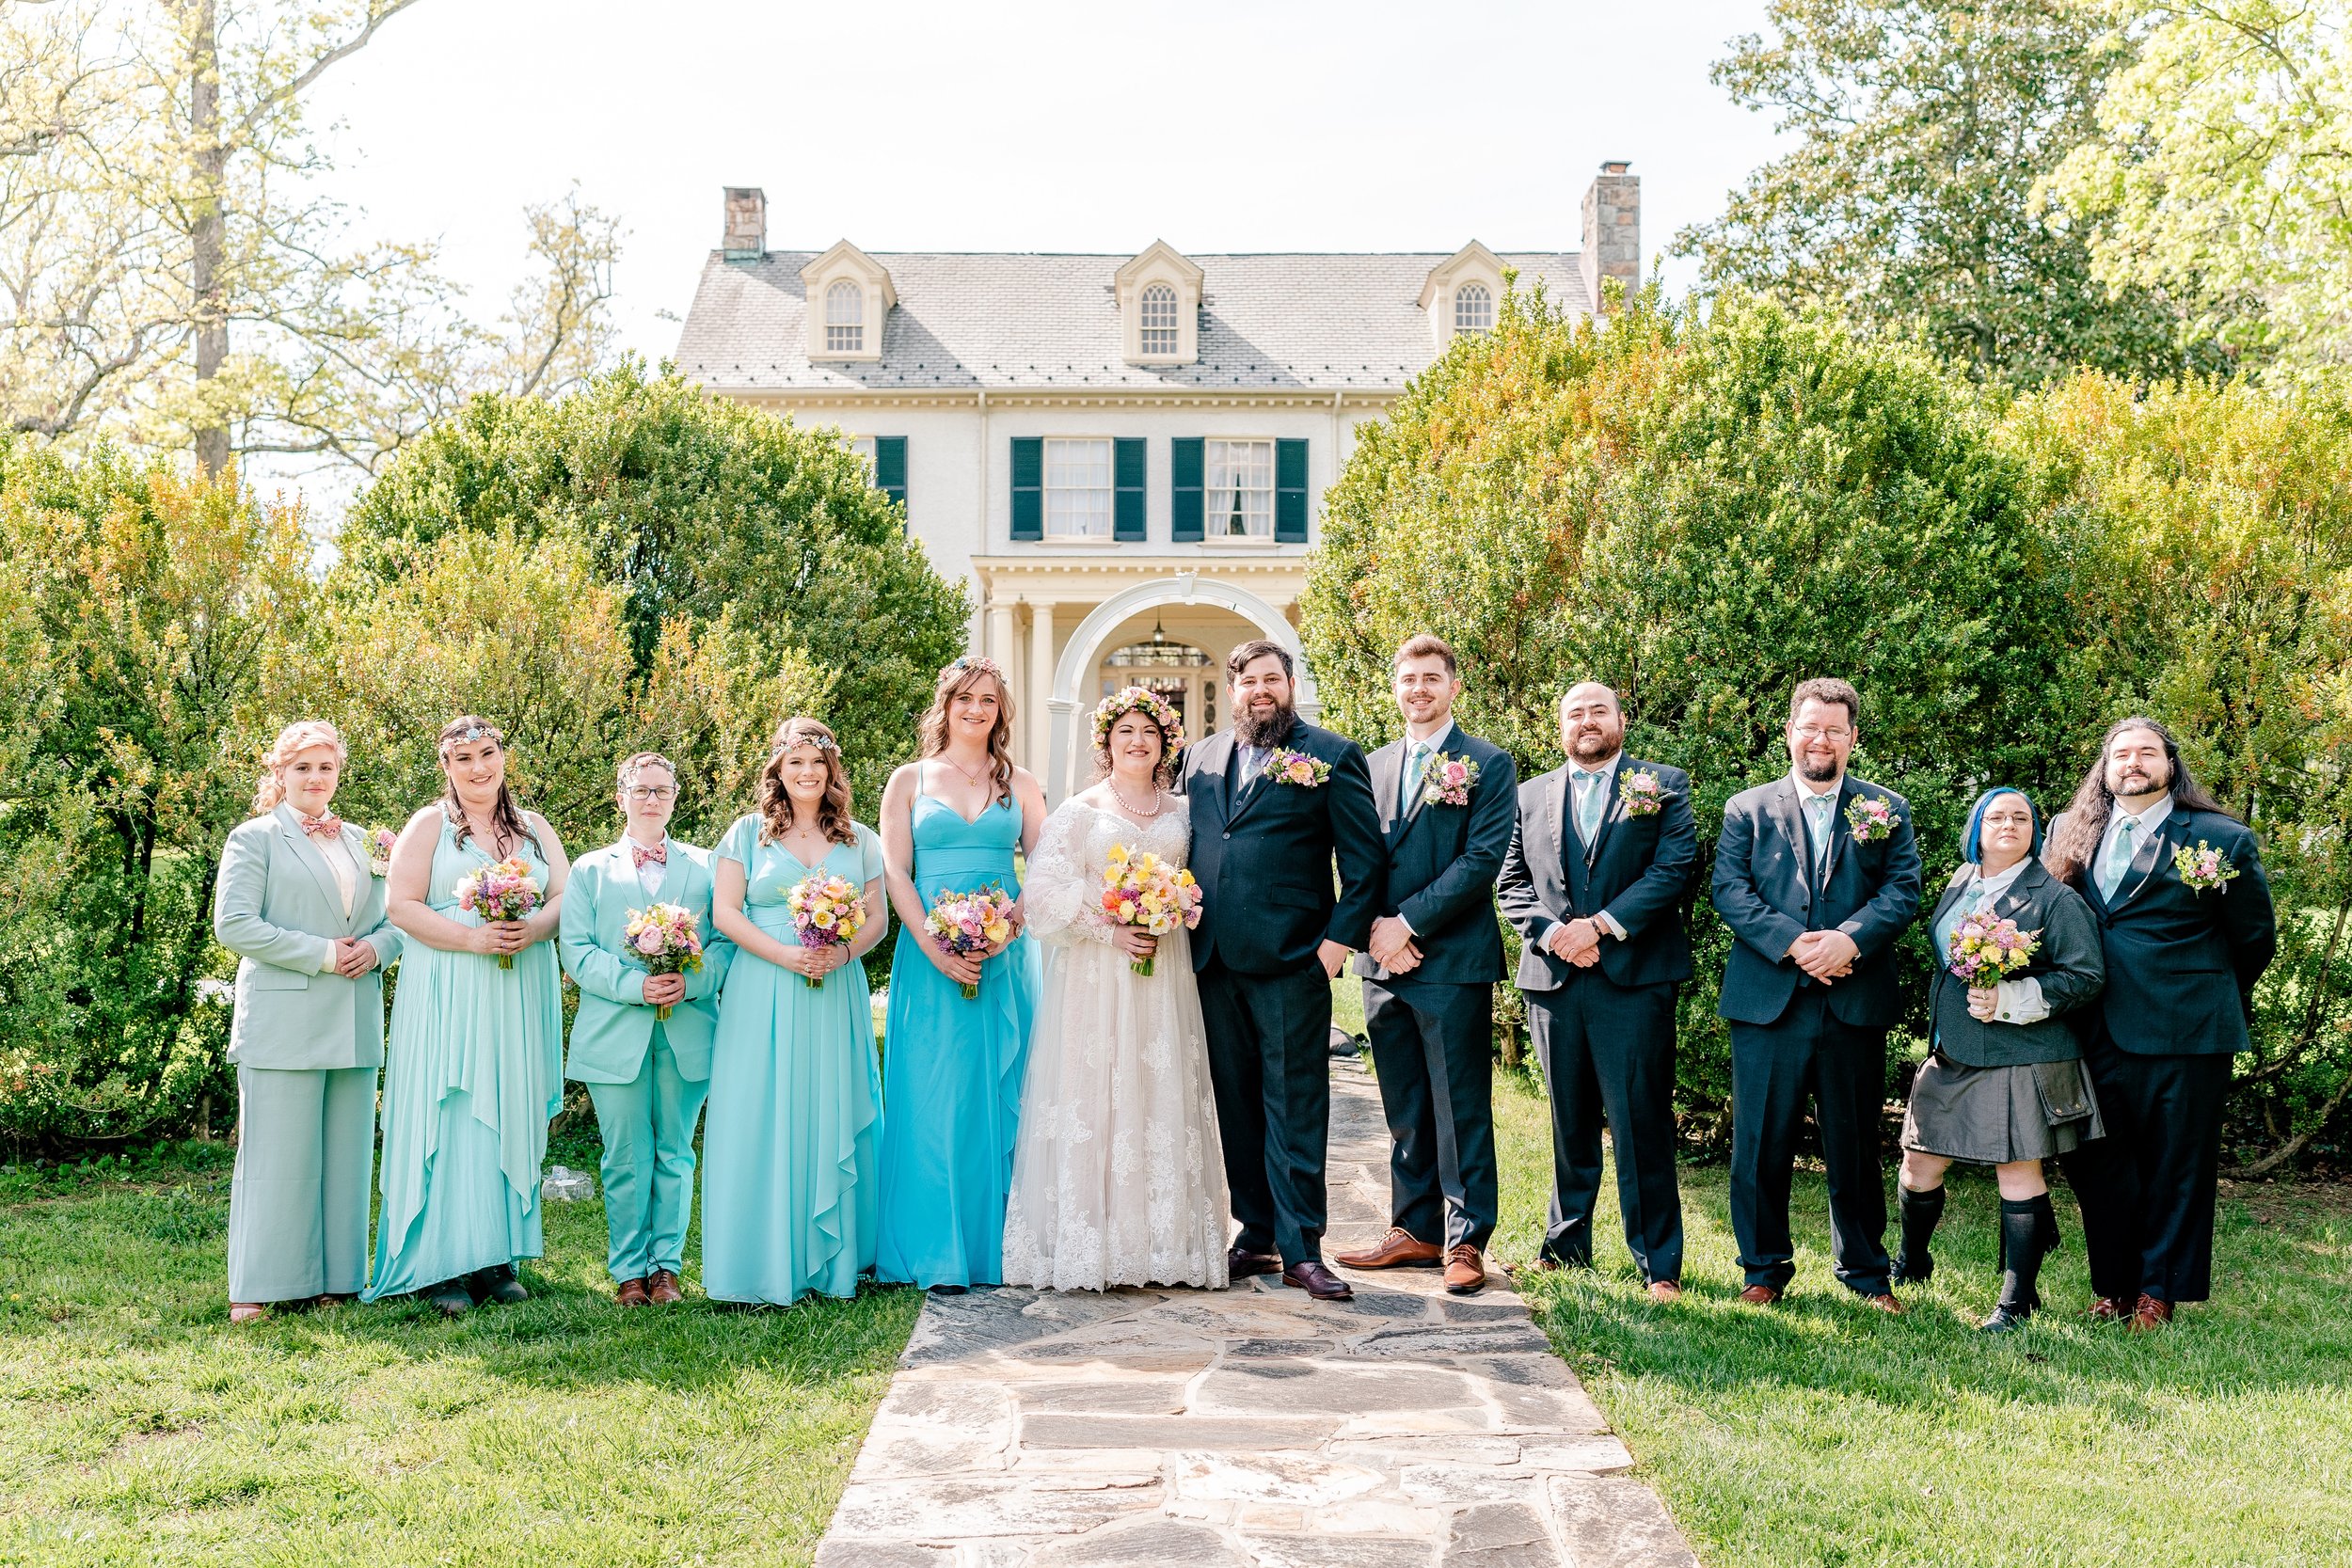 A bridal party dressed in shades of aqua standing in front of the historic house at one of the best wedding venues in Northern Virginia